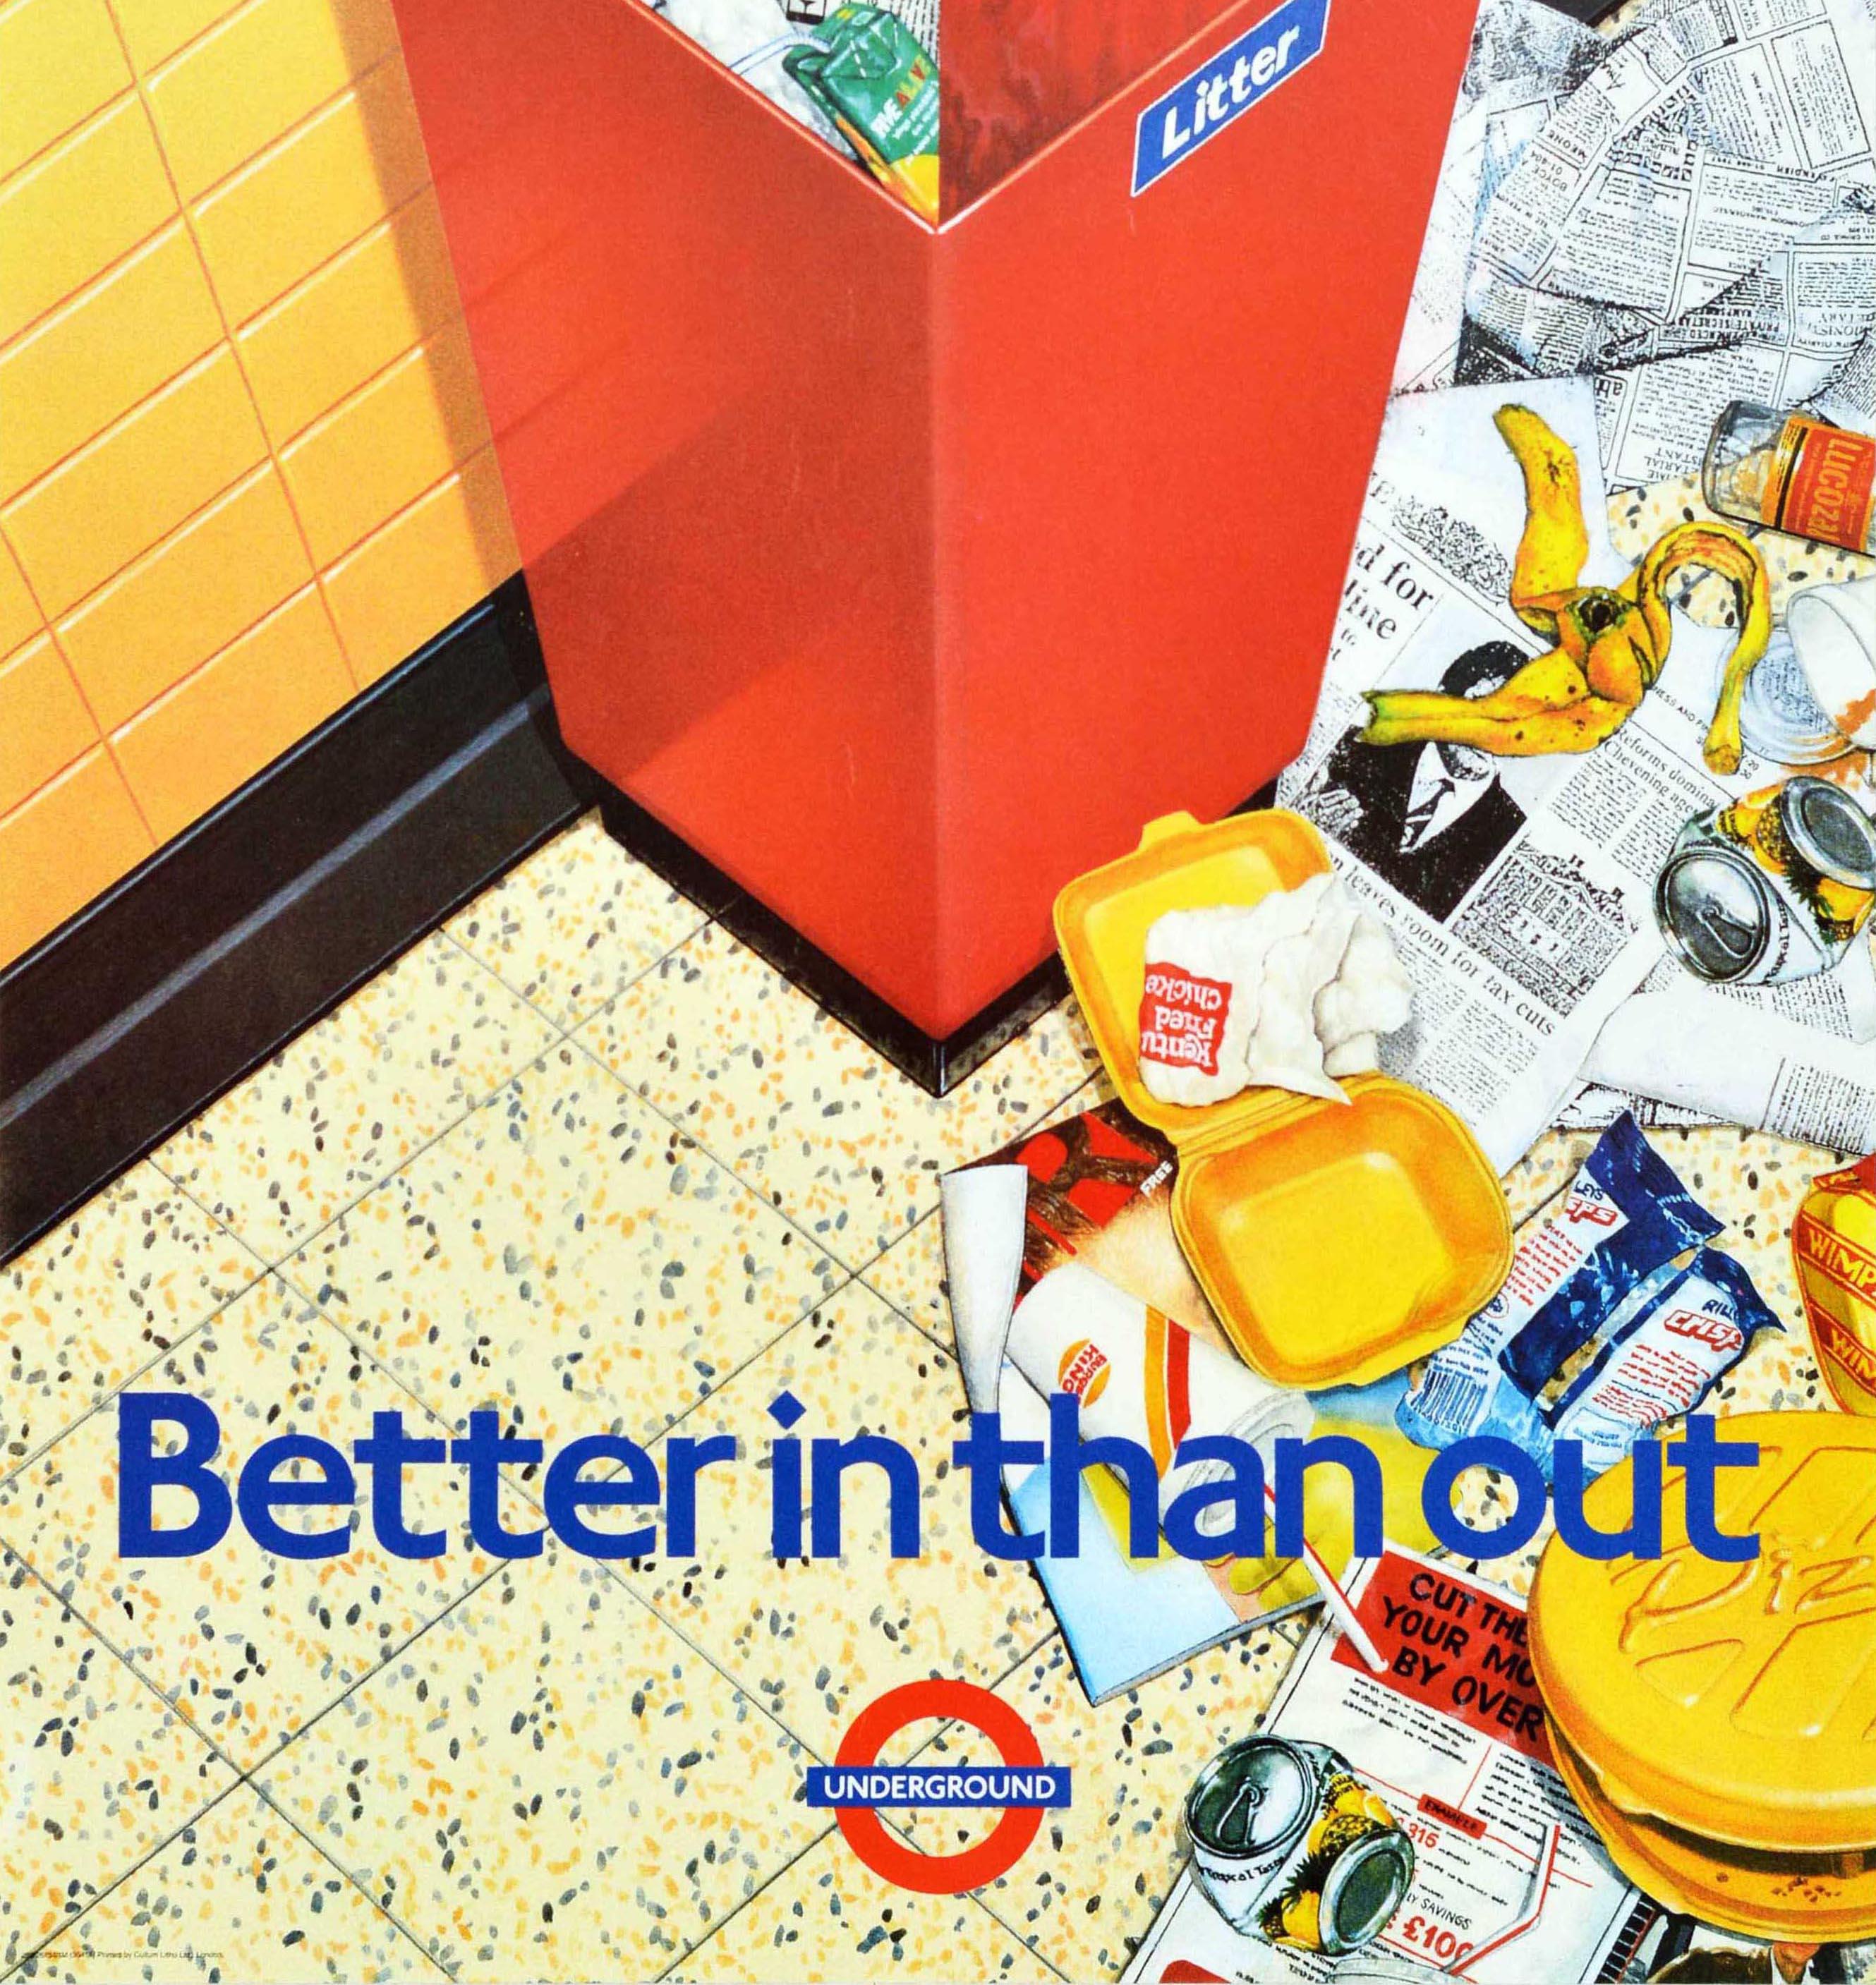 Original vintage London Underground poster to encourage passengers to throw away their rubbish properly - Better In Than Out - featuring a red litter bin with old newspapers and drink containers in it, and more rubbish on the floor around it